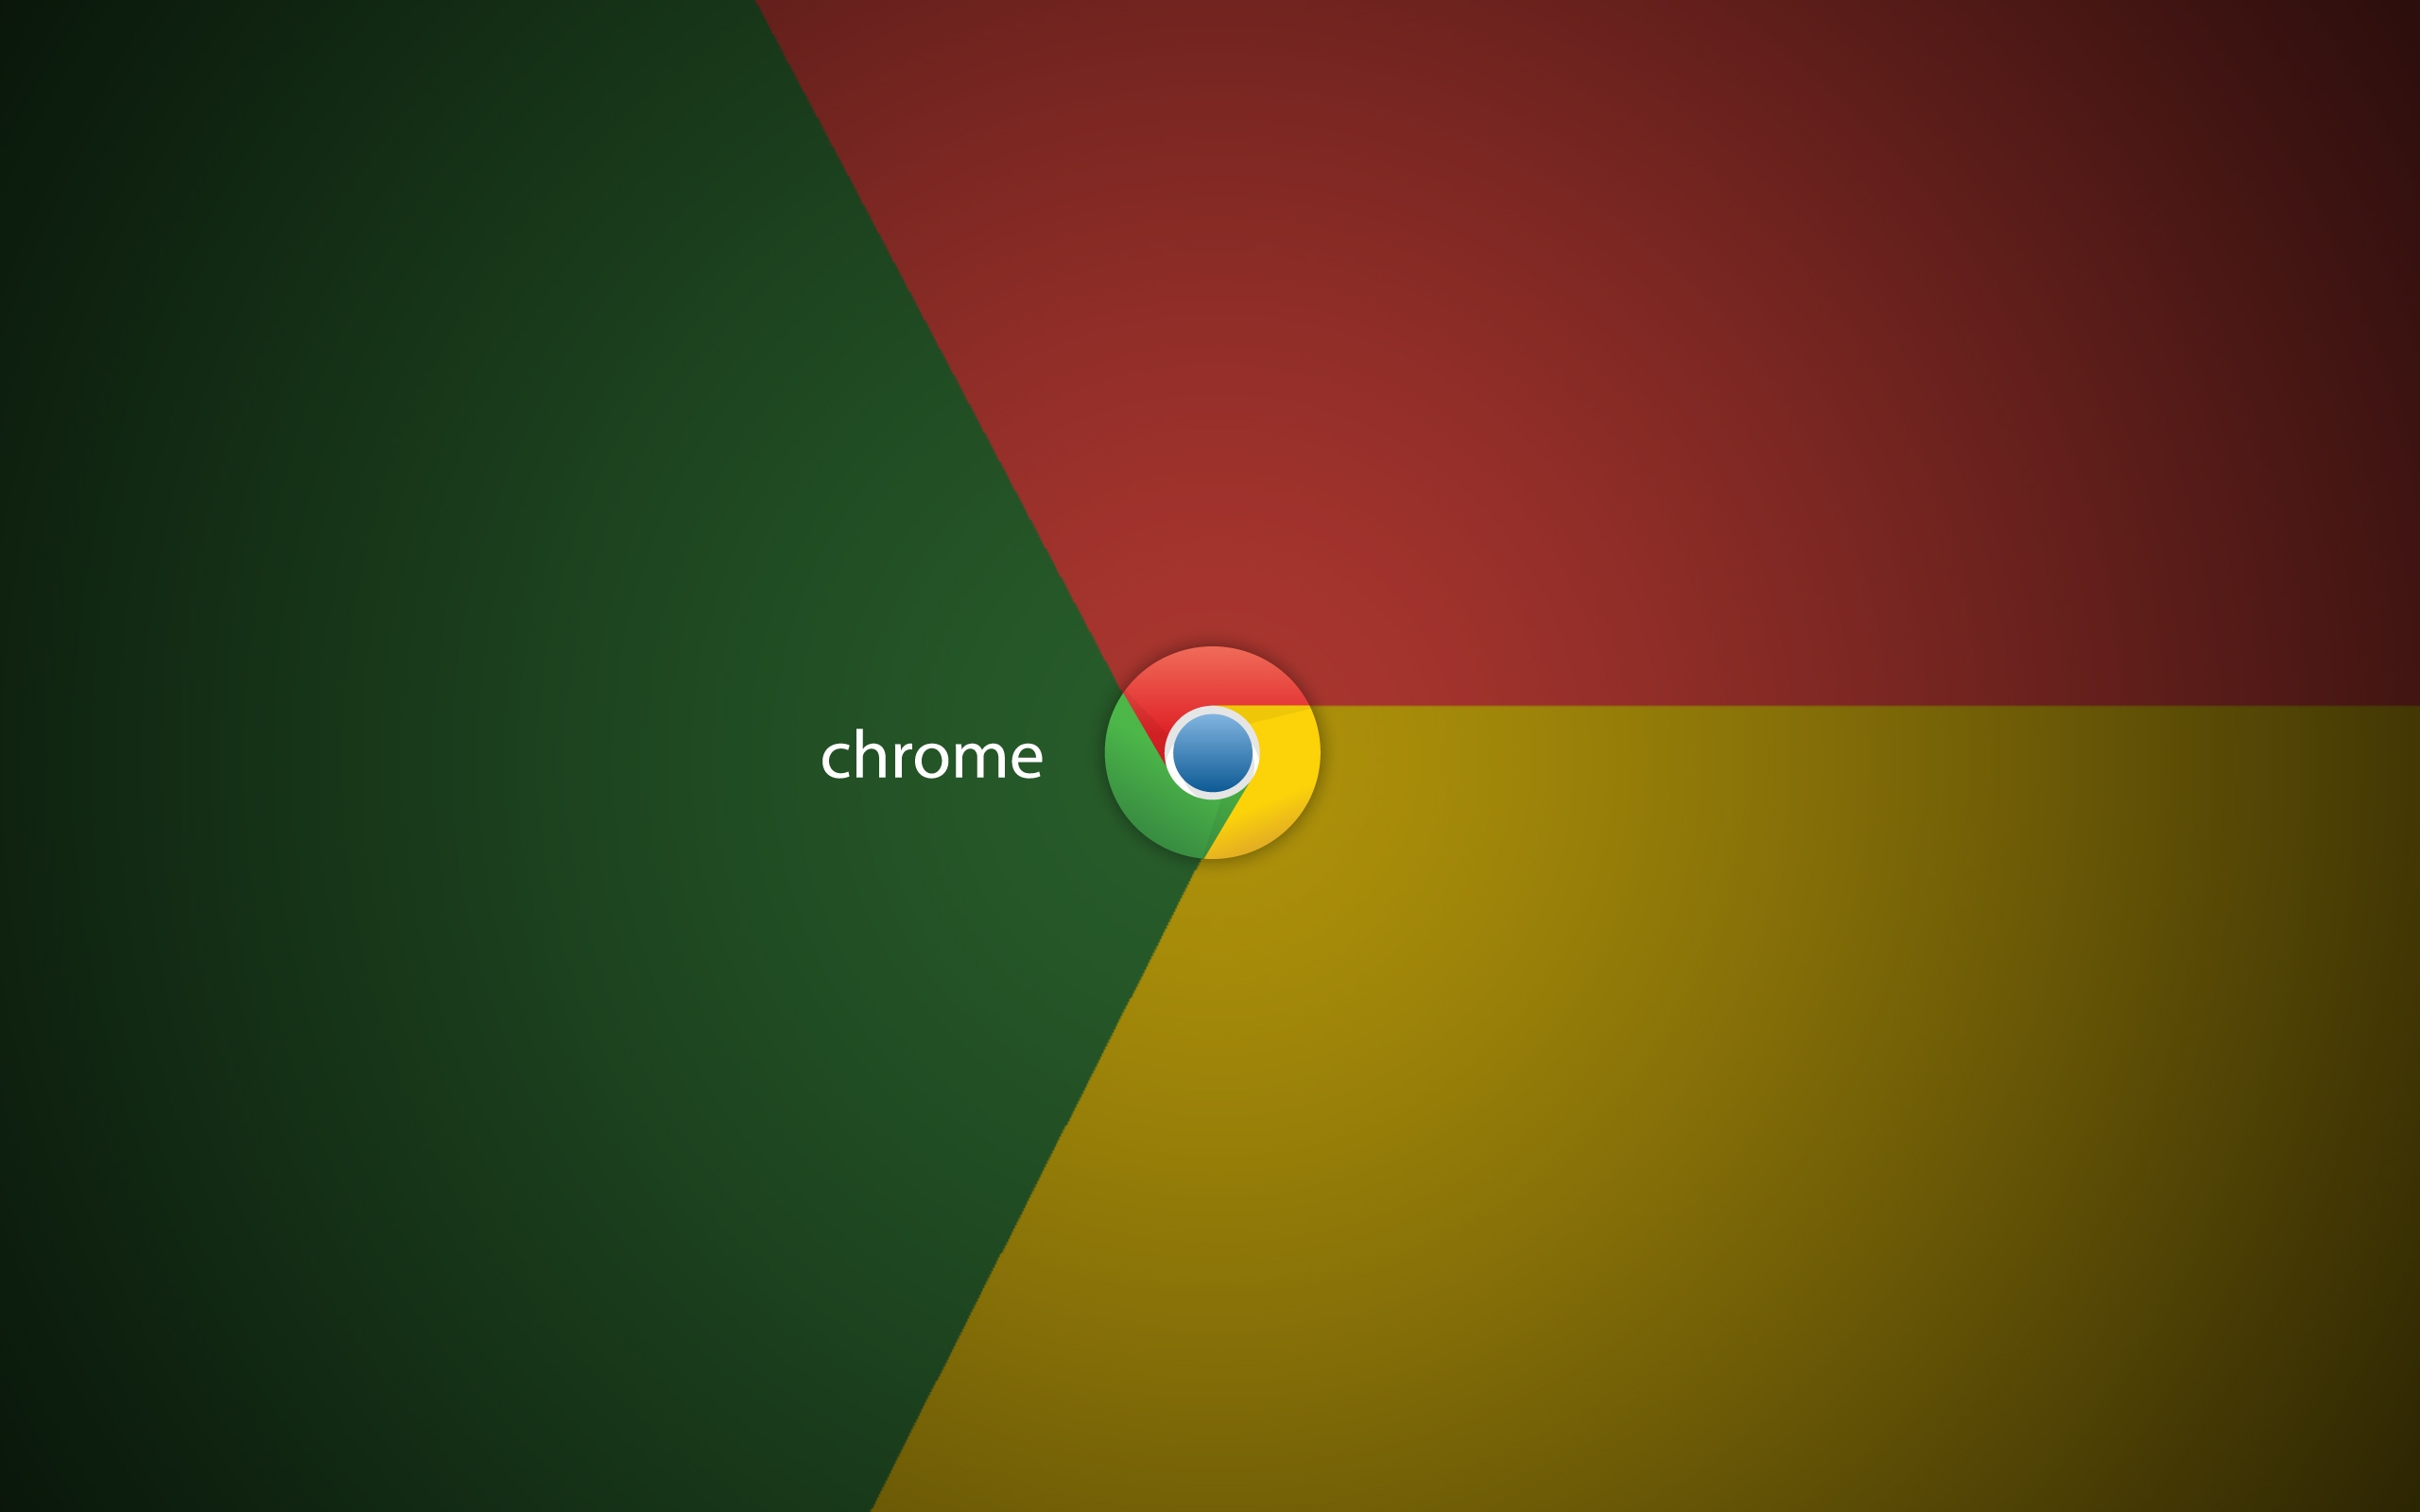 Just Google Chrome for 2560 x 1600 widescreen resolution